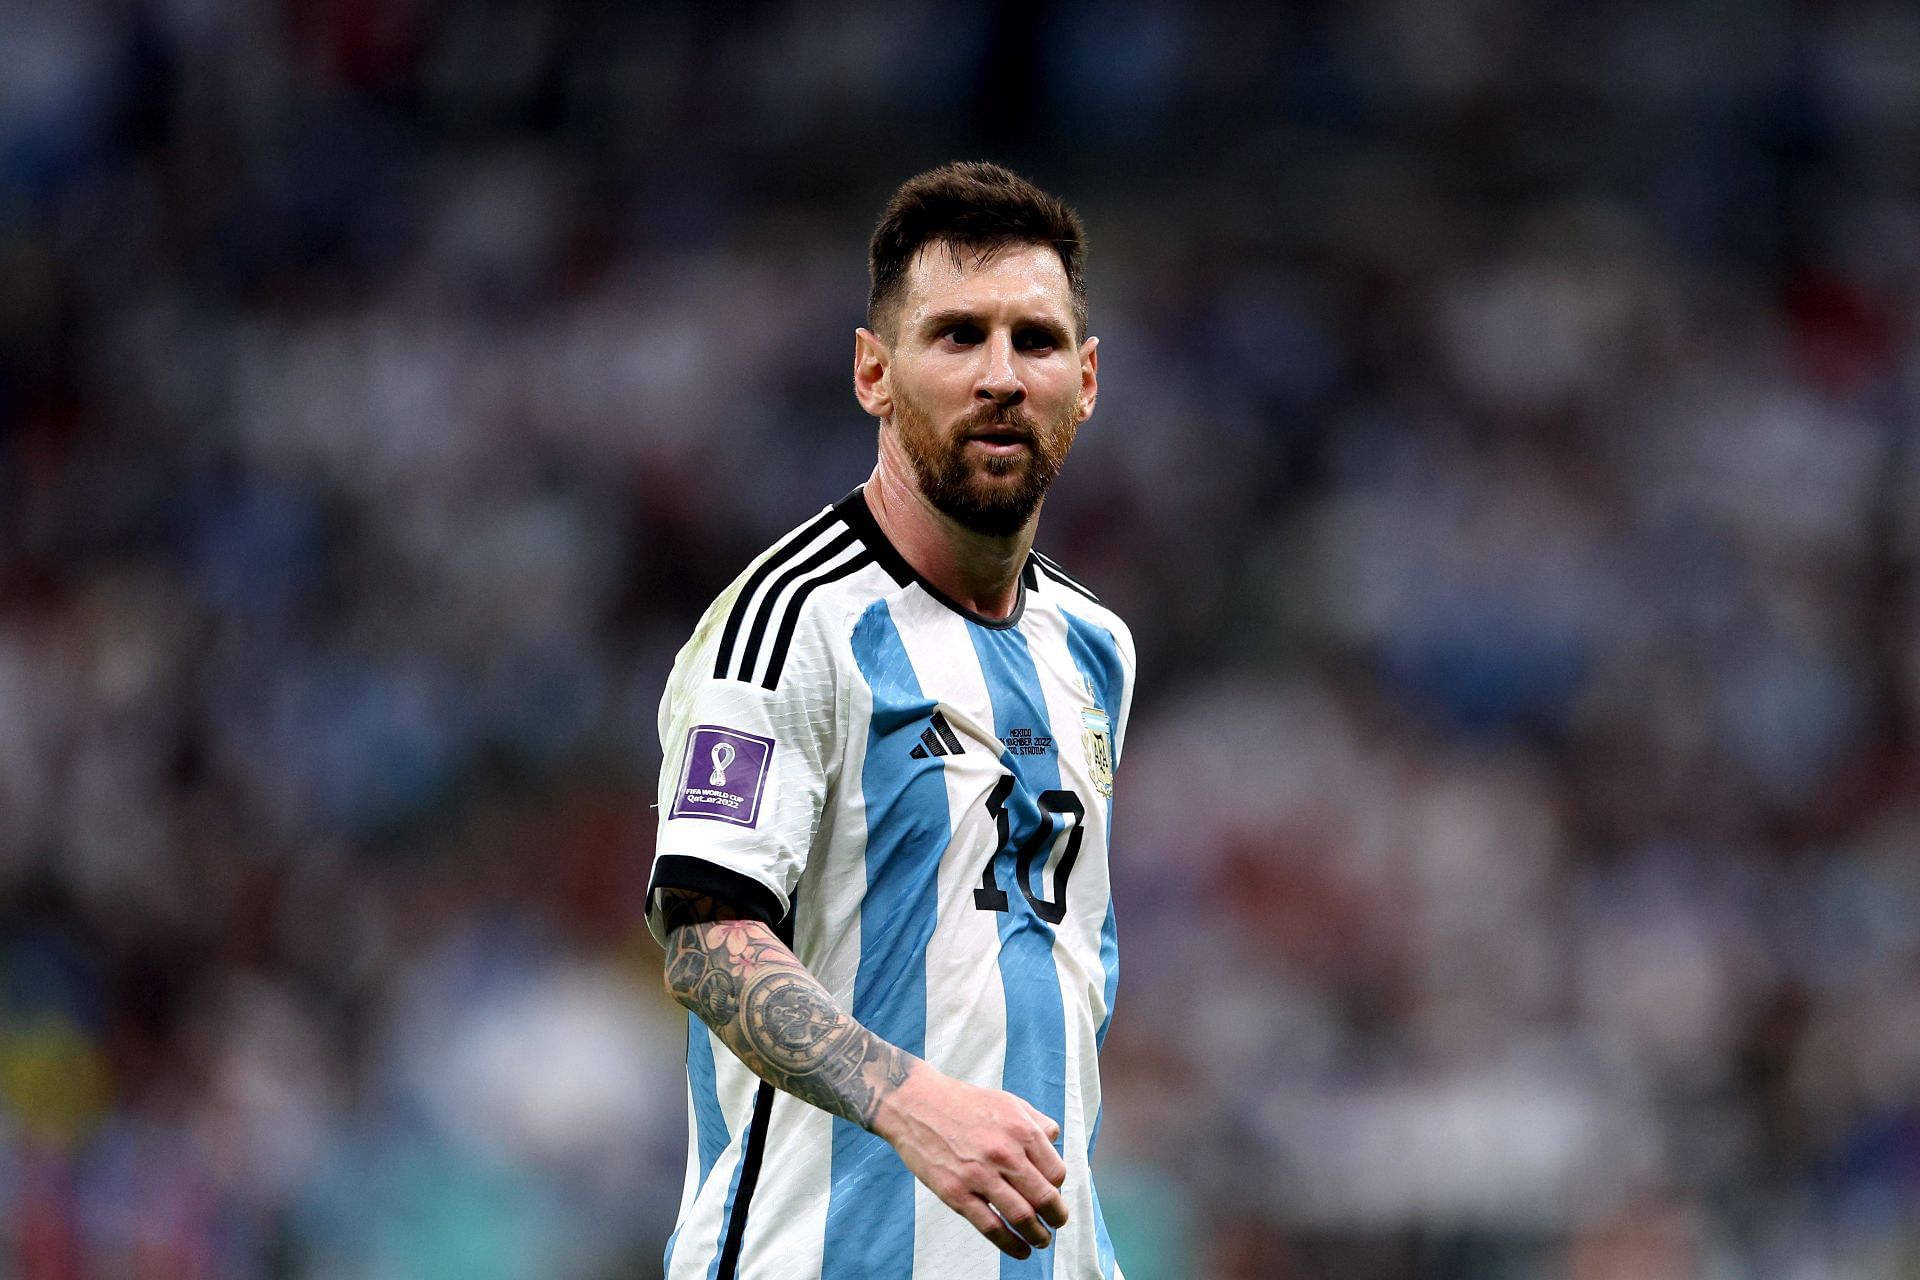 Lionel Messi has scored twice in as many games in the World Cup this year.